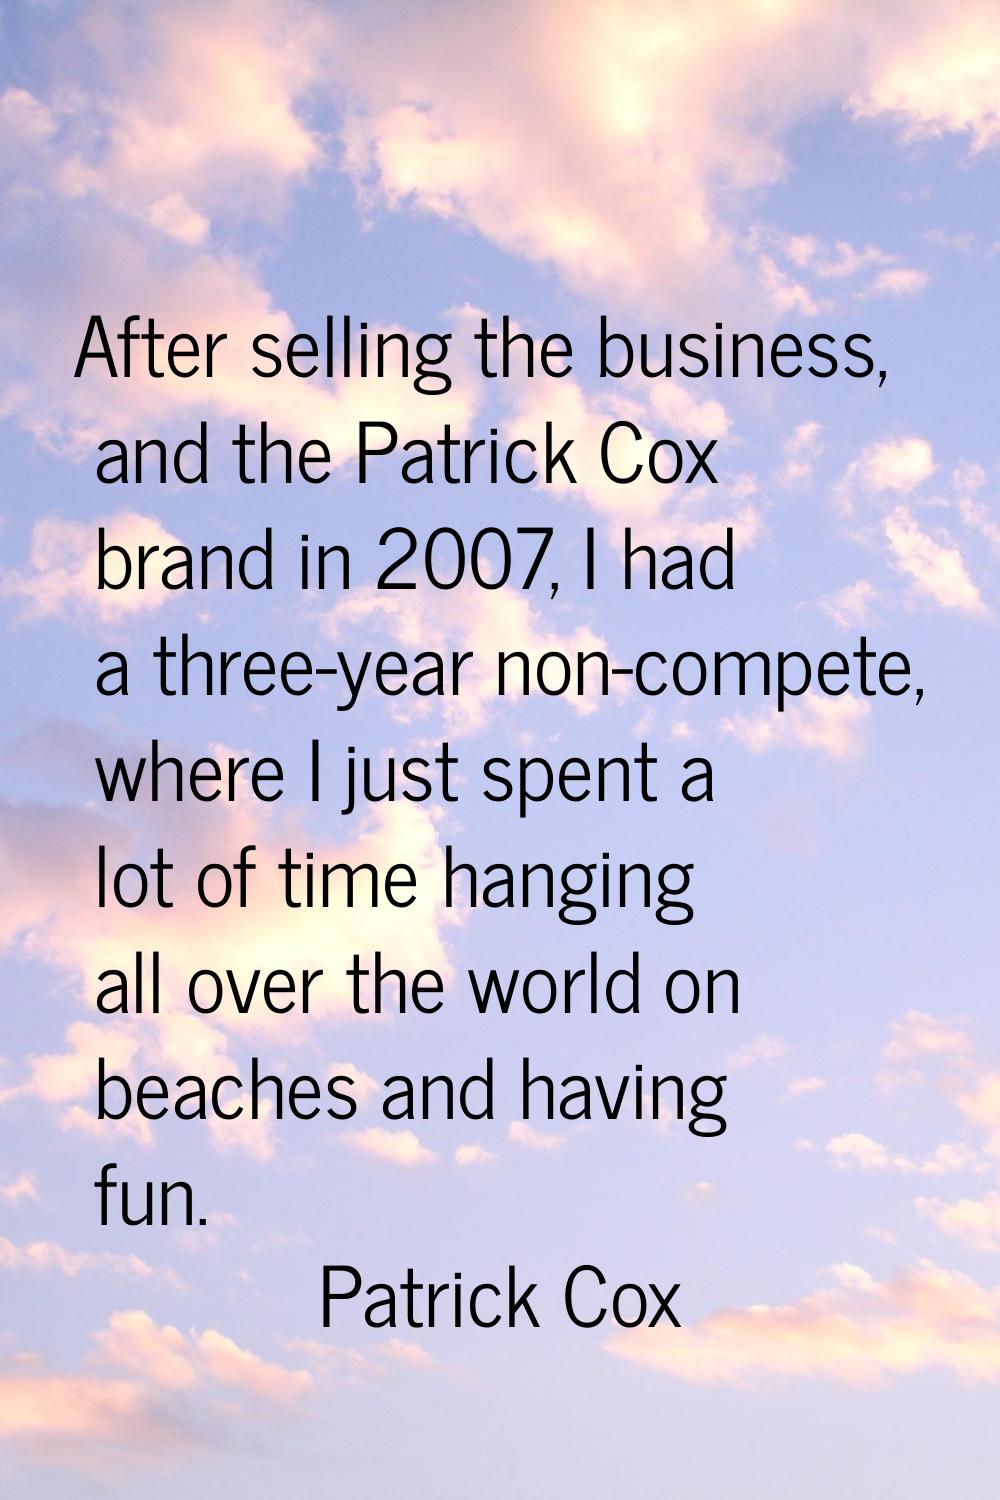 After selling the business, and the Patrick Cox brand in 2007, I had a three-year non-compete, wher